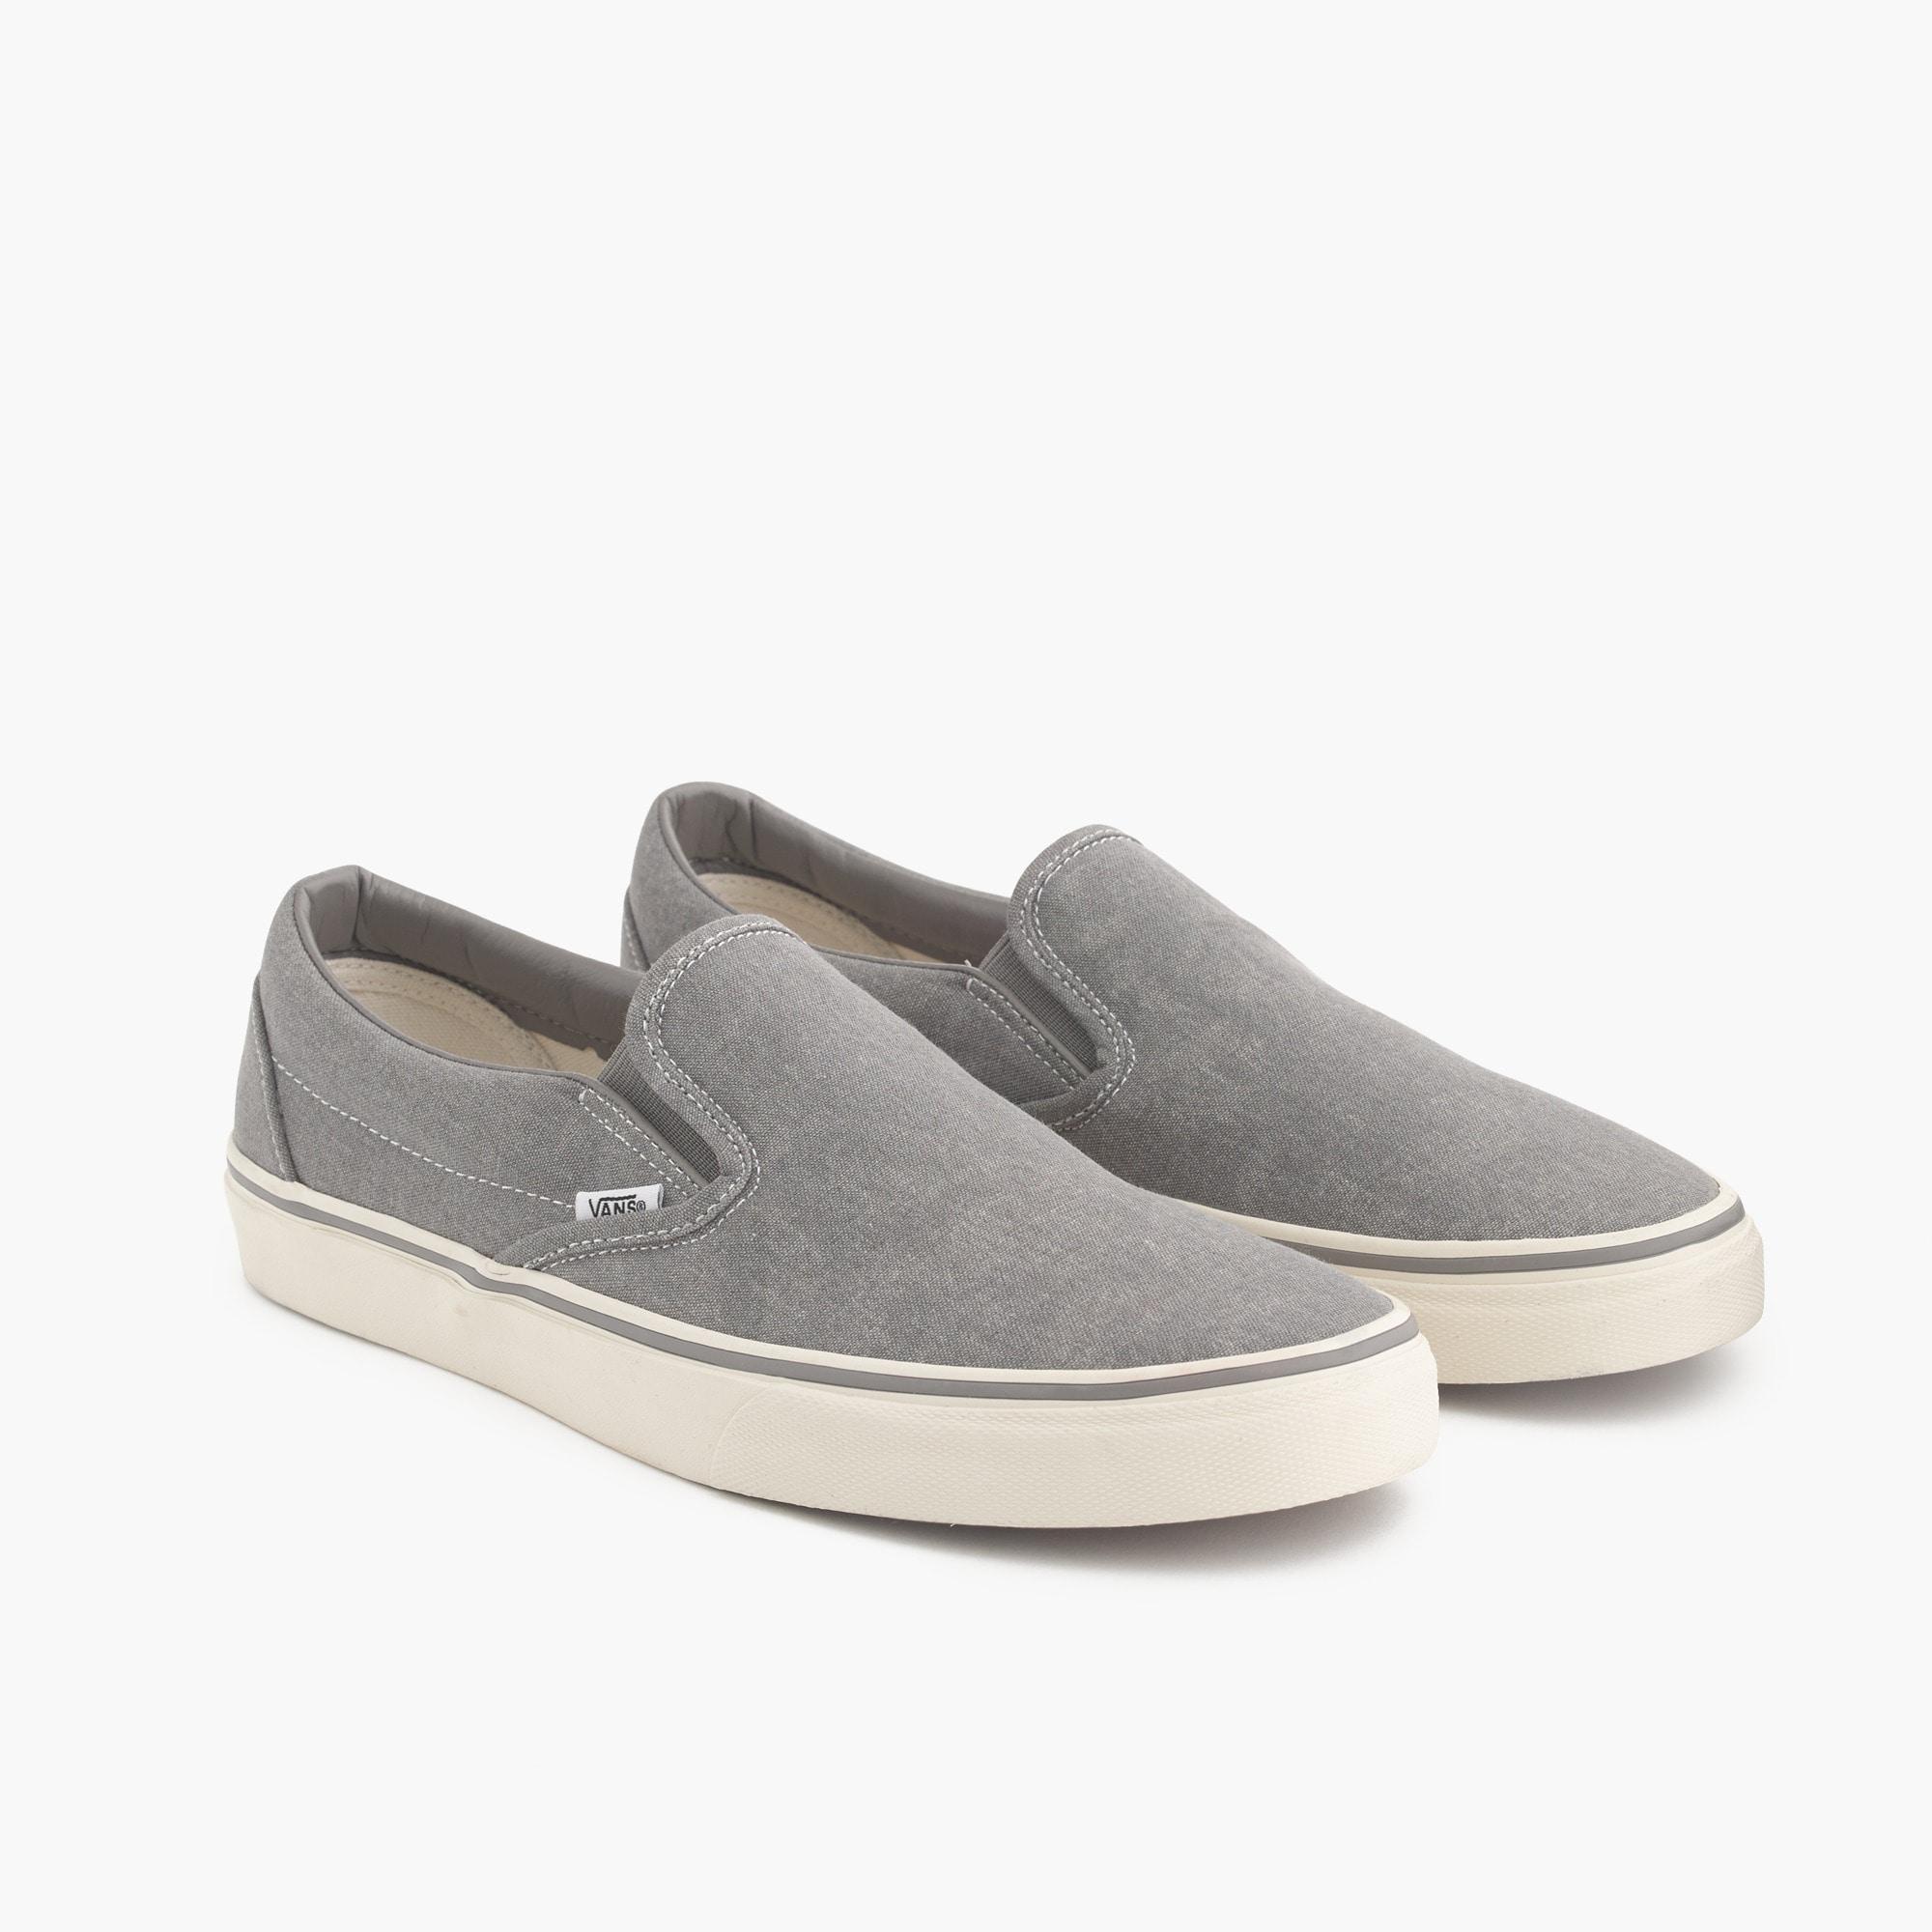 Vans ® For J.crew Washed Canvas Classic Slip-on Sneakers in Metallic ...